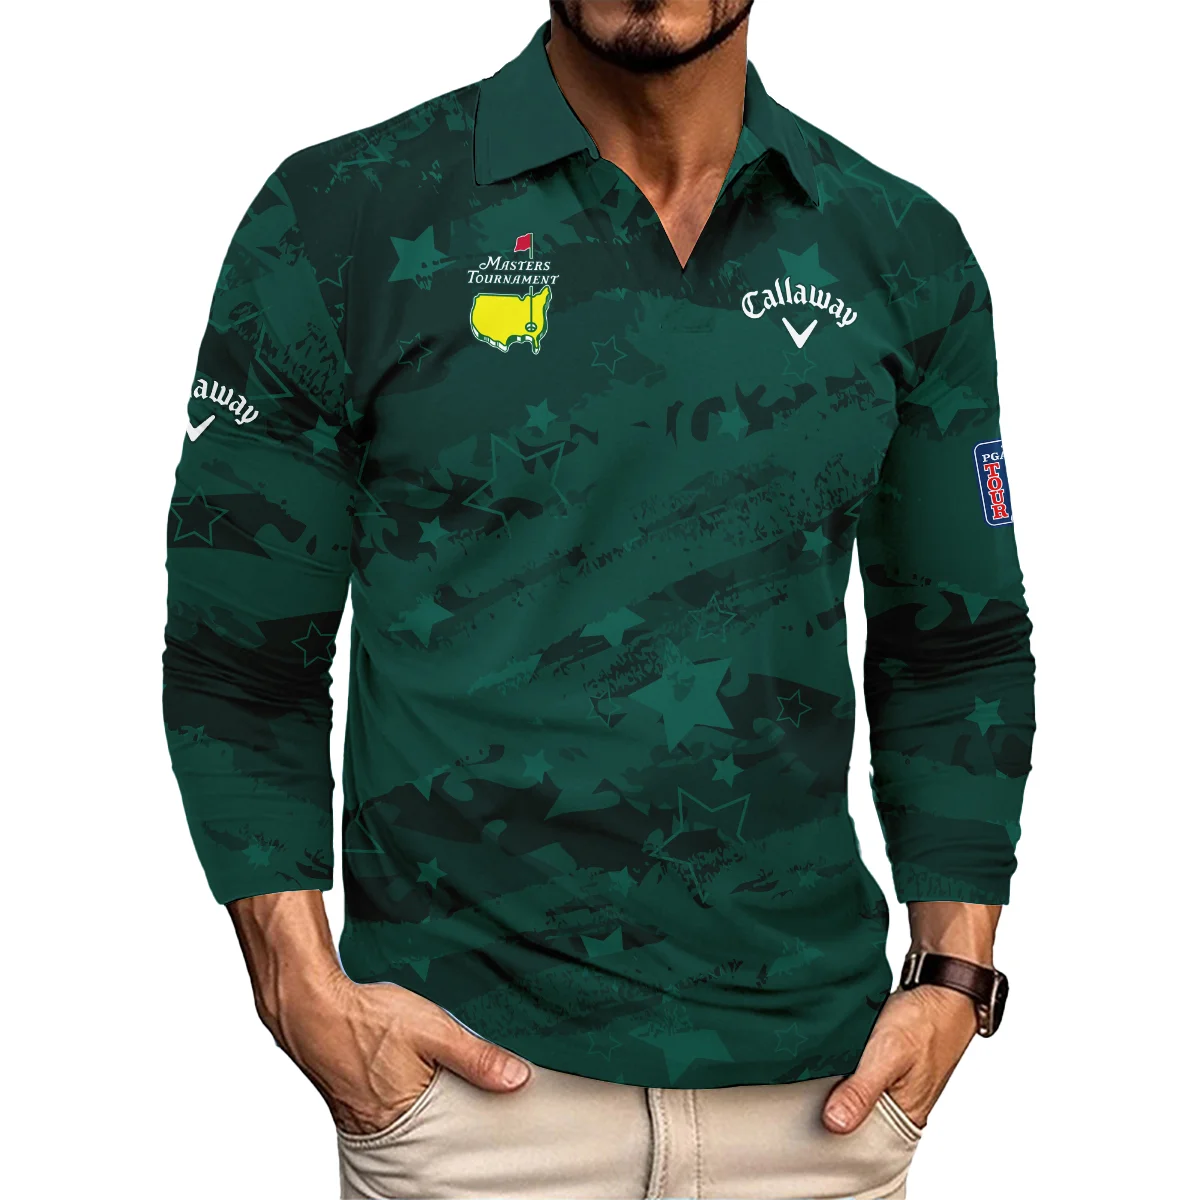 Dark Green Stars Pattern Grunge Background Masters Tournament Callaway Polo Shirt Style Classic Polo Shirt For Men